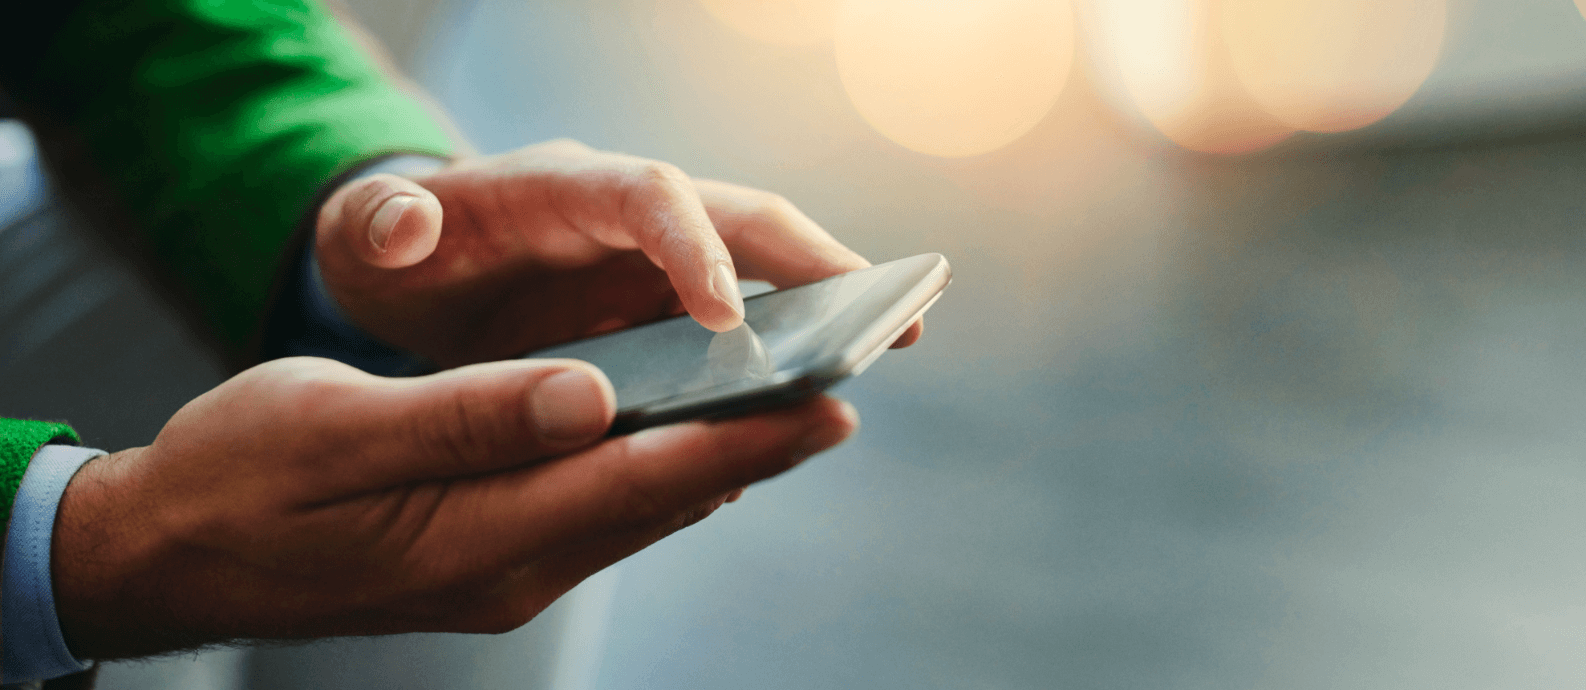 Mobile-first-Development-Is-Becoming-a-Requirement-to-Reach-Users